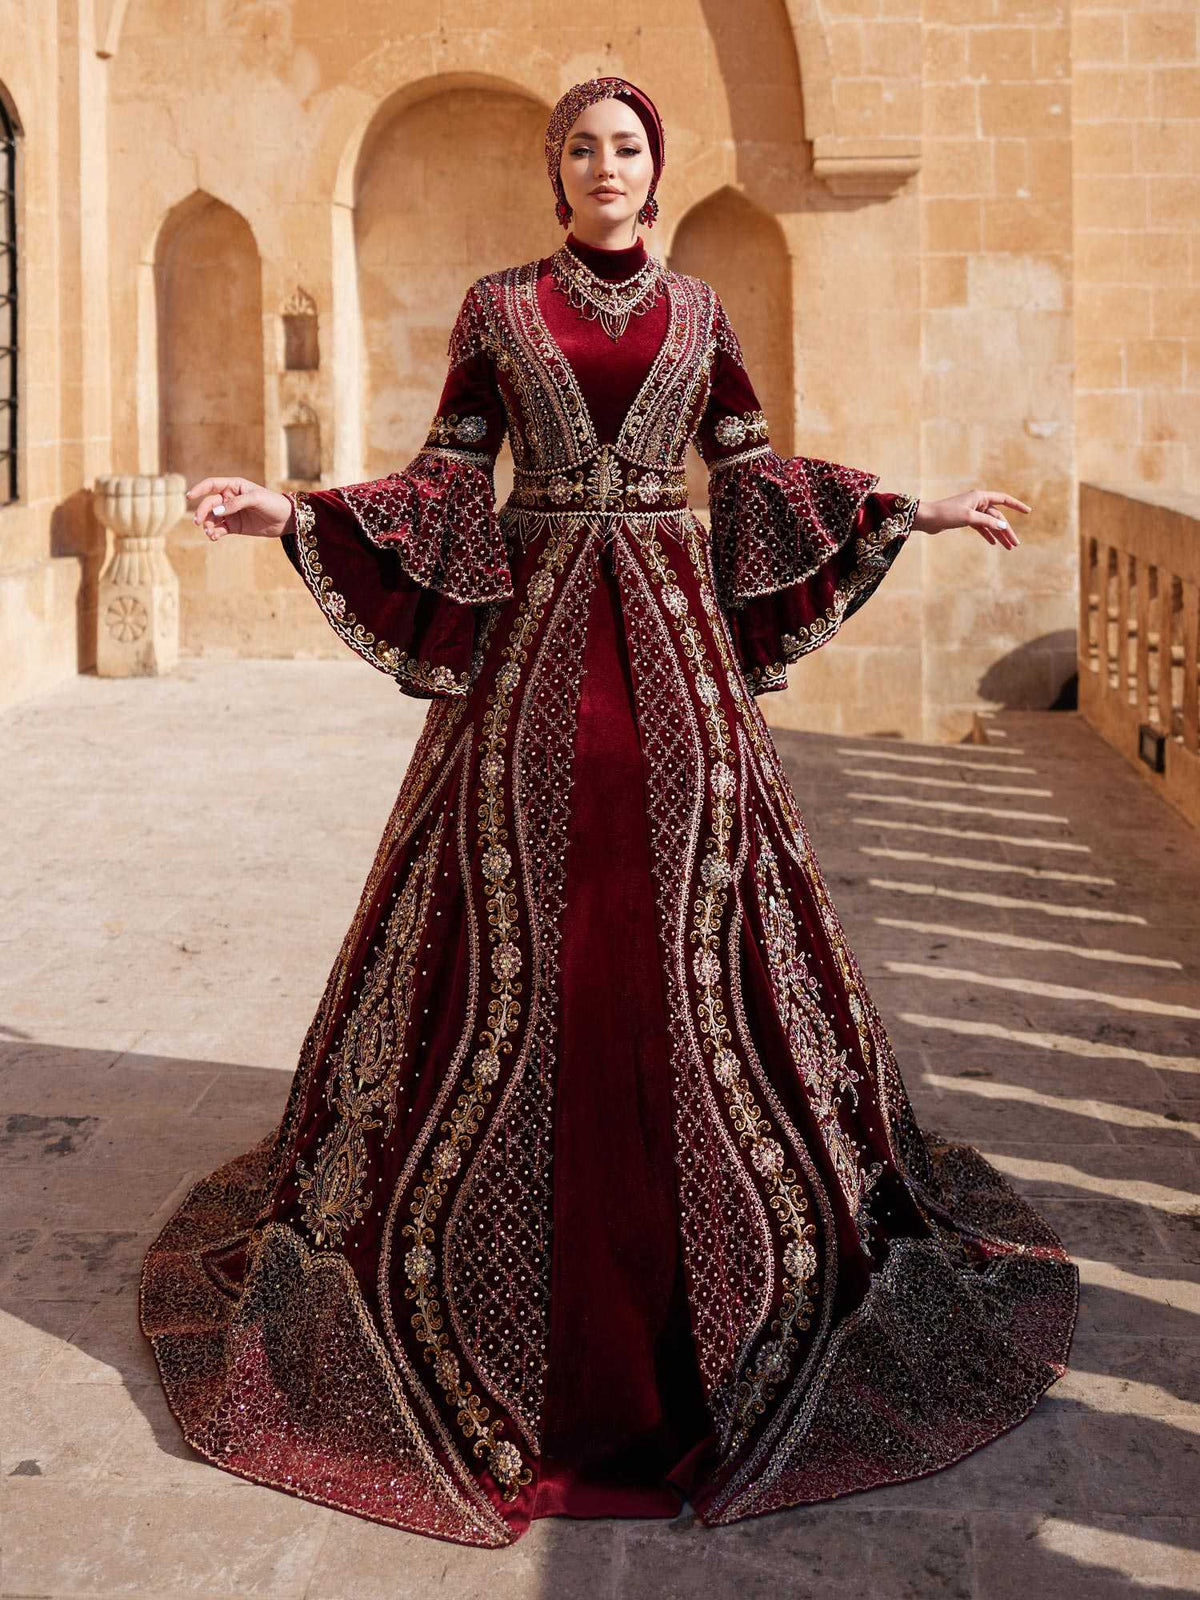 buy Burgundy Embroidered Sequin Long Sleeve Henna Hijab Gown Dress plus sizes online henna turkish kaftans 